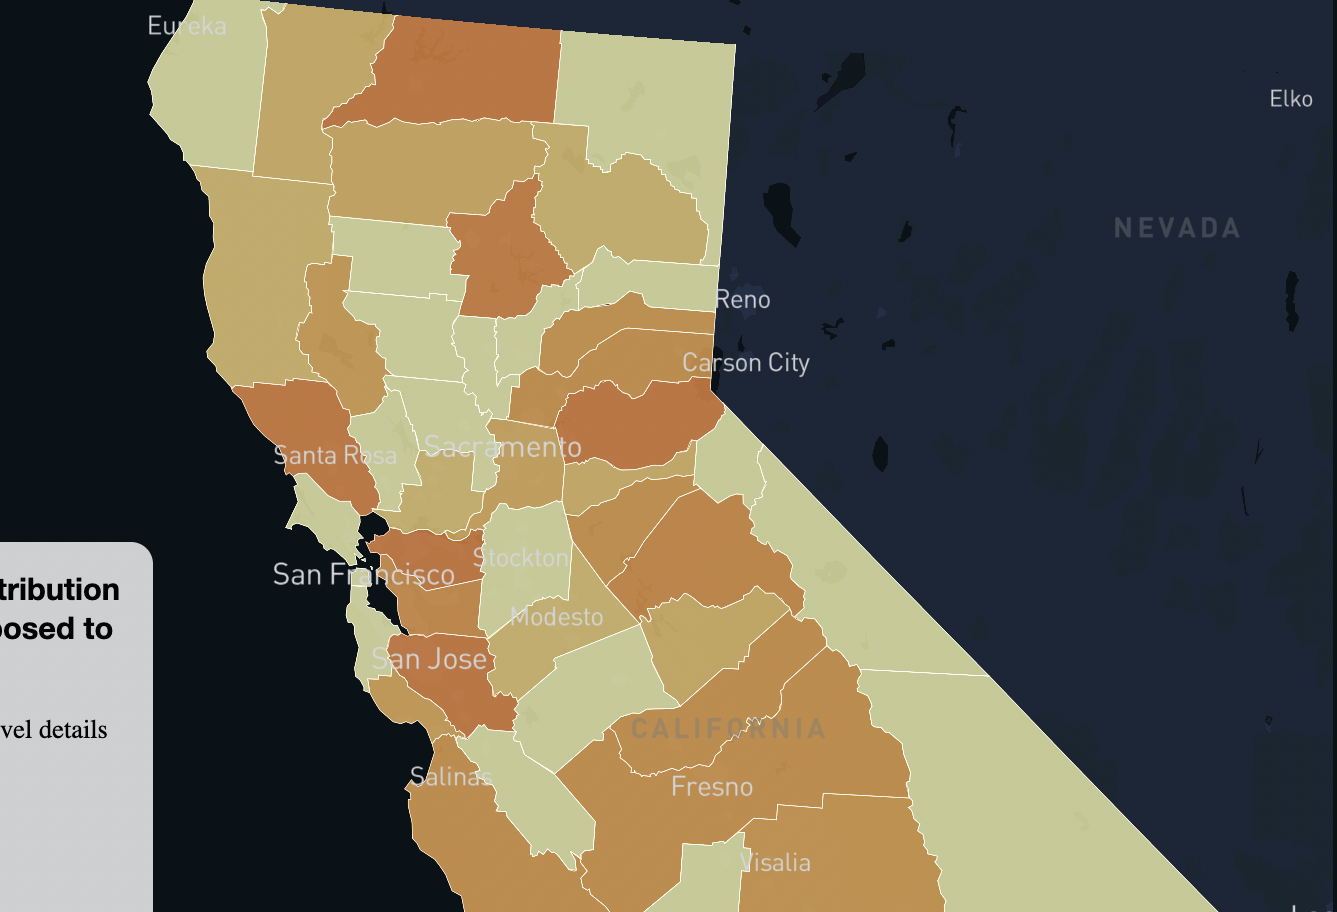 A choropleth map of California showing shades of orange to show fire risks.